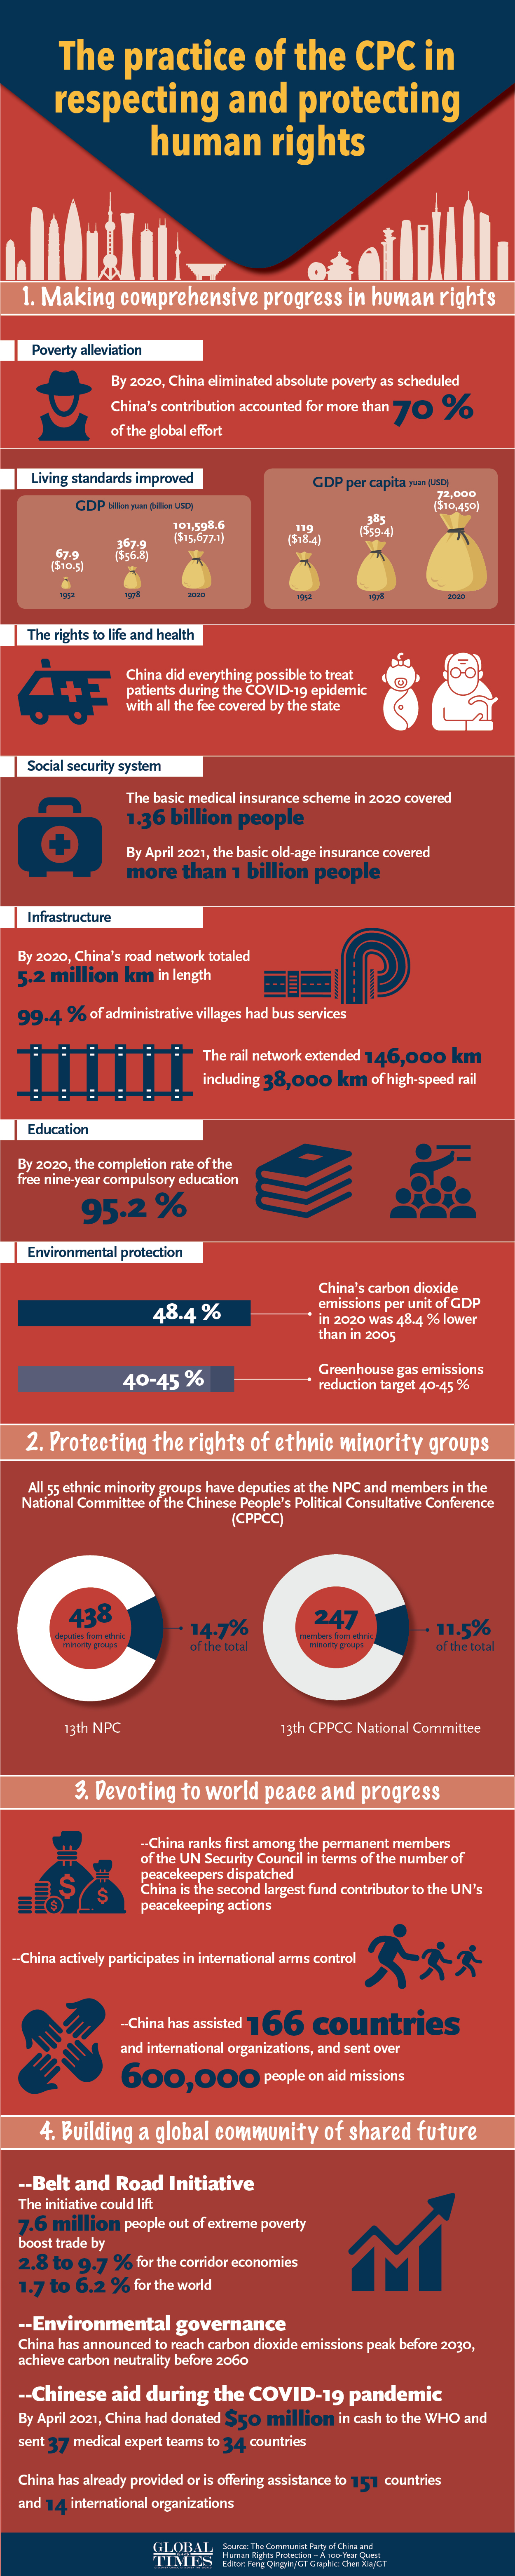 The practice of the CPC in respecting and protecting human rights Graphic: Chen Xia, Feng Qingyin/GT